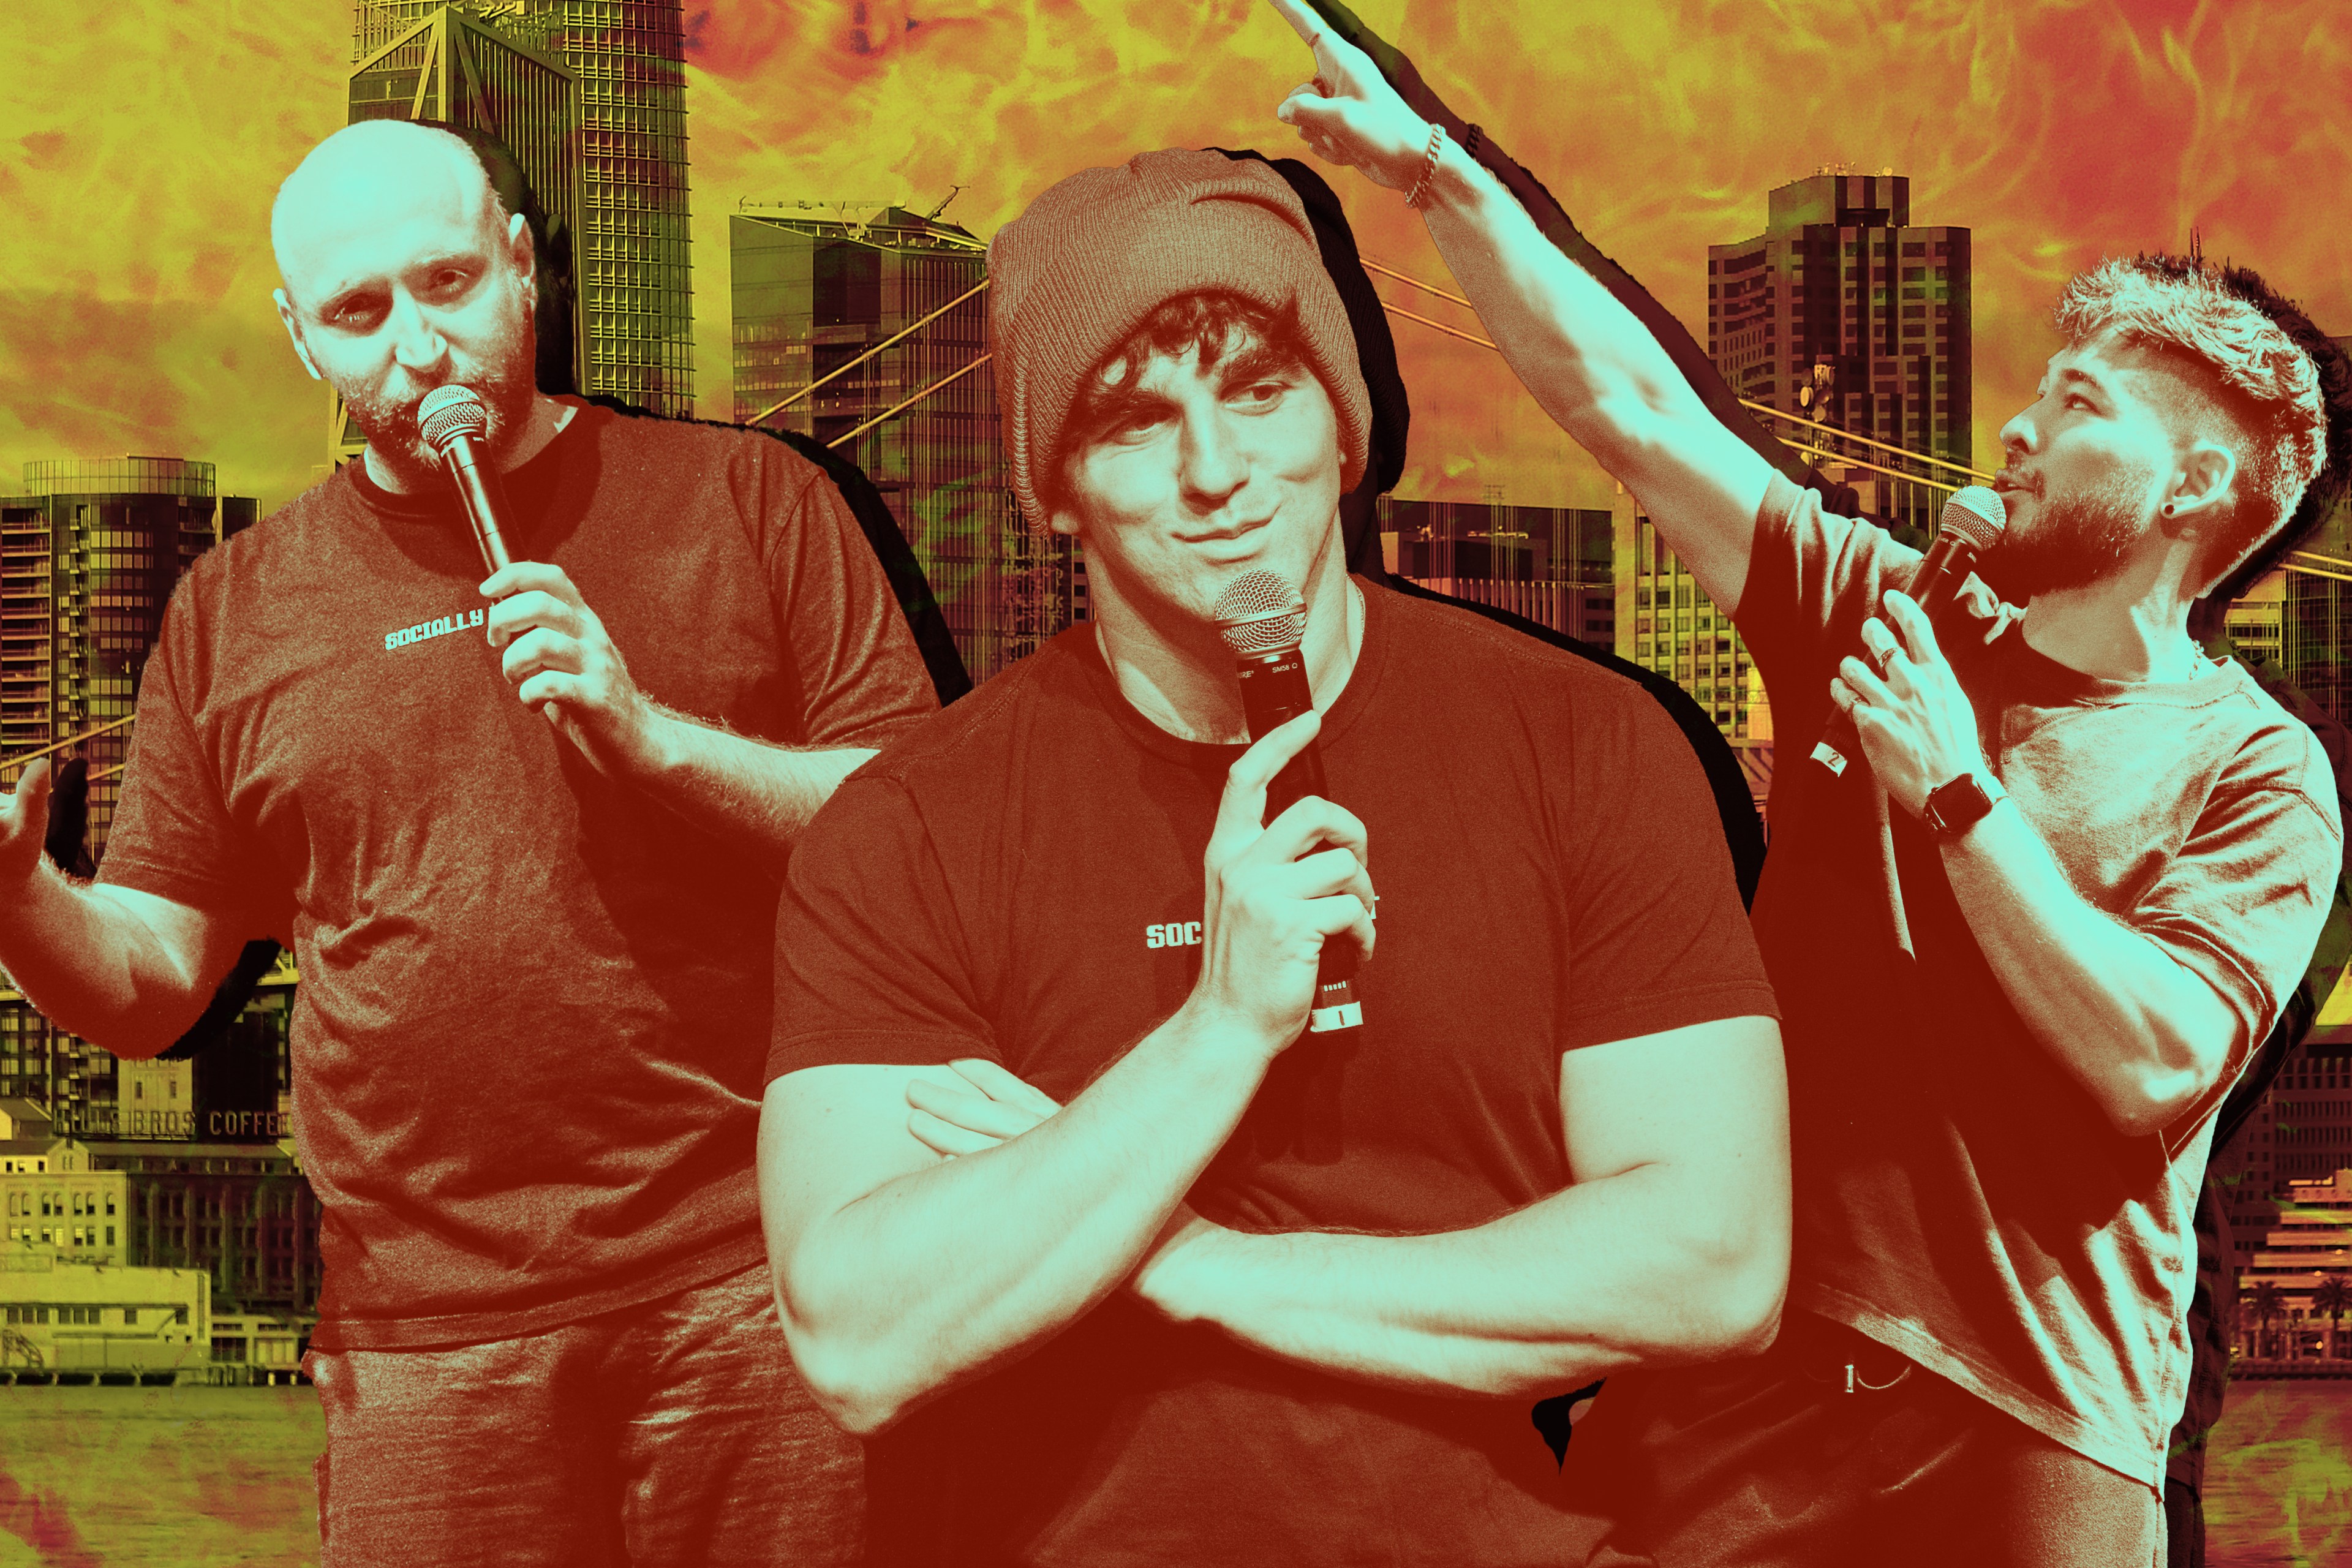 Three men, each holding a microphone, are superimposed against a cityscape with a fiery, dramatic sky. The central man wears a beanie, while the other two are speaking animatedly.